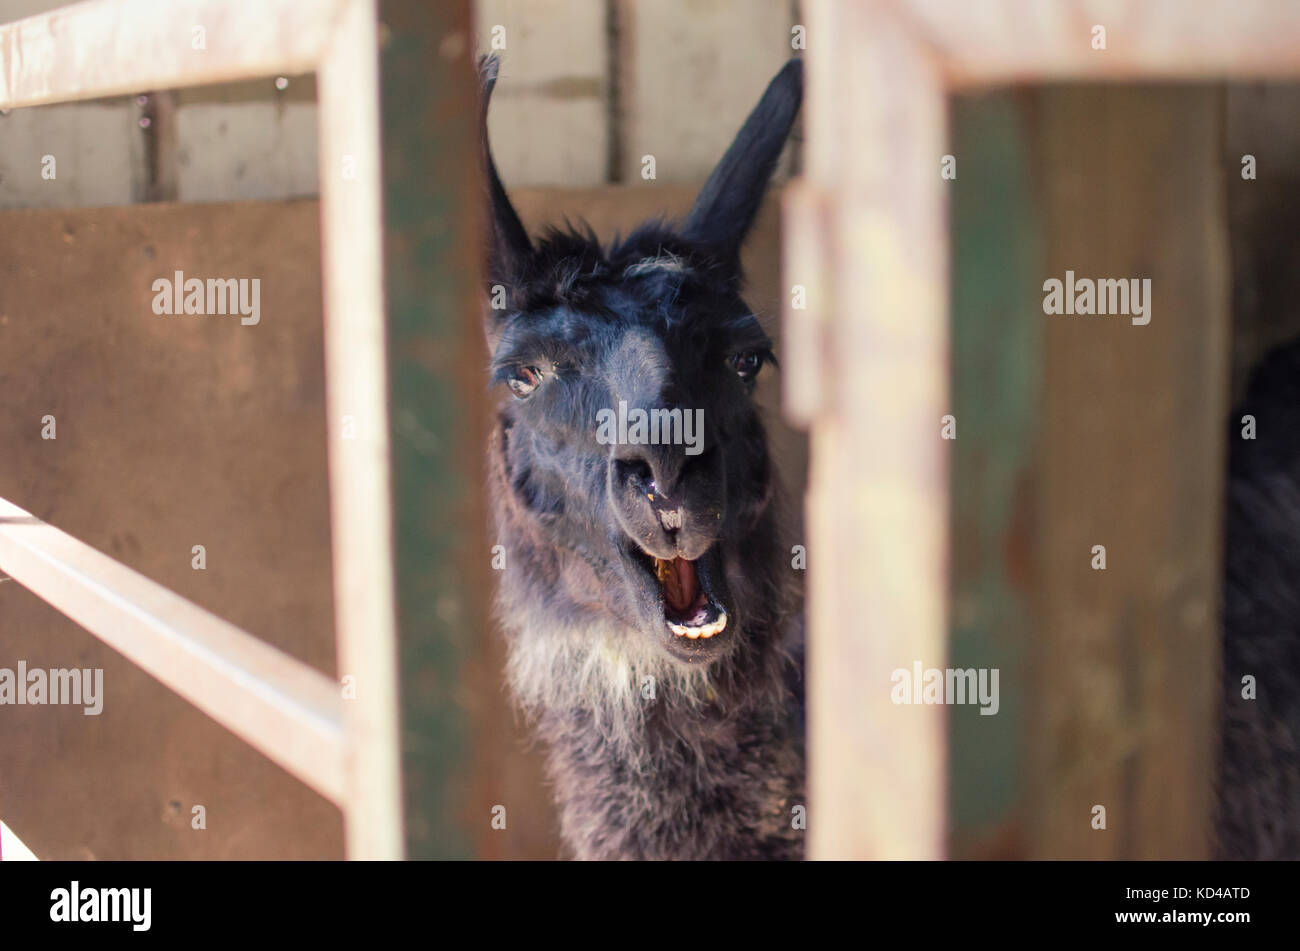 Funny farm animal shows dark brown llama chewing while happy on agriculture farm.  Shows livestock industry lifestyle. Stock Photo